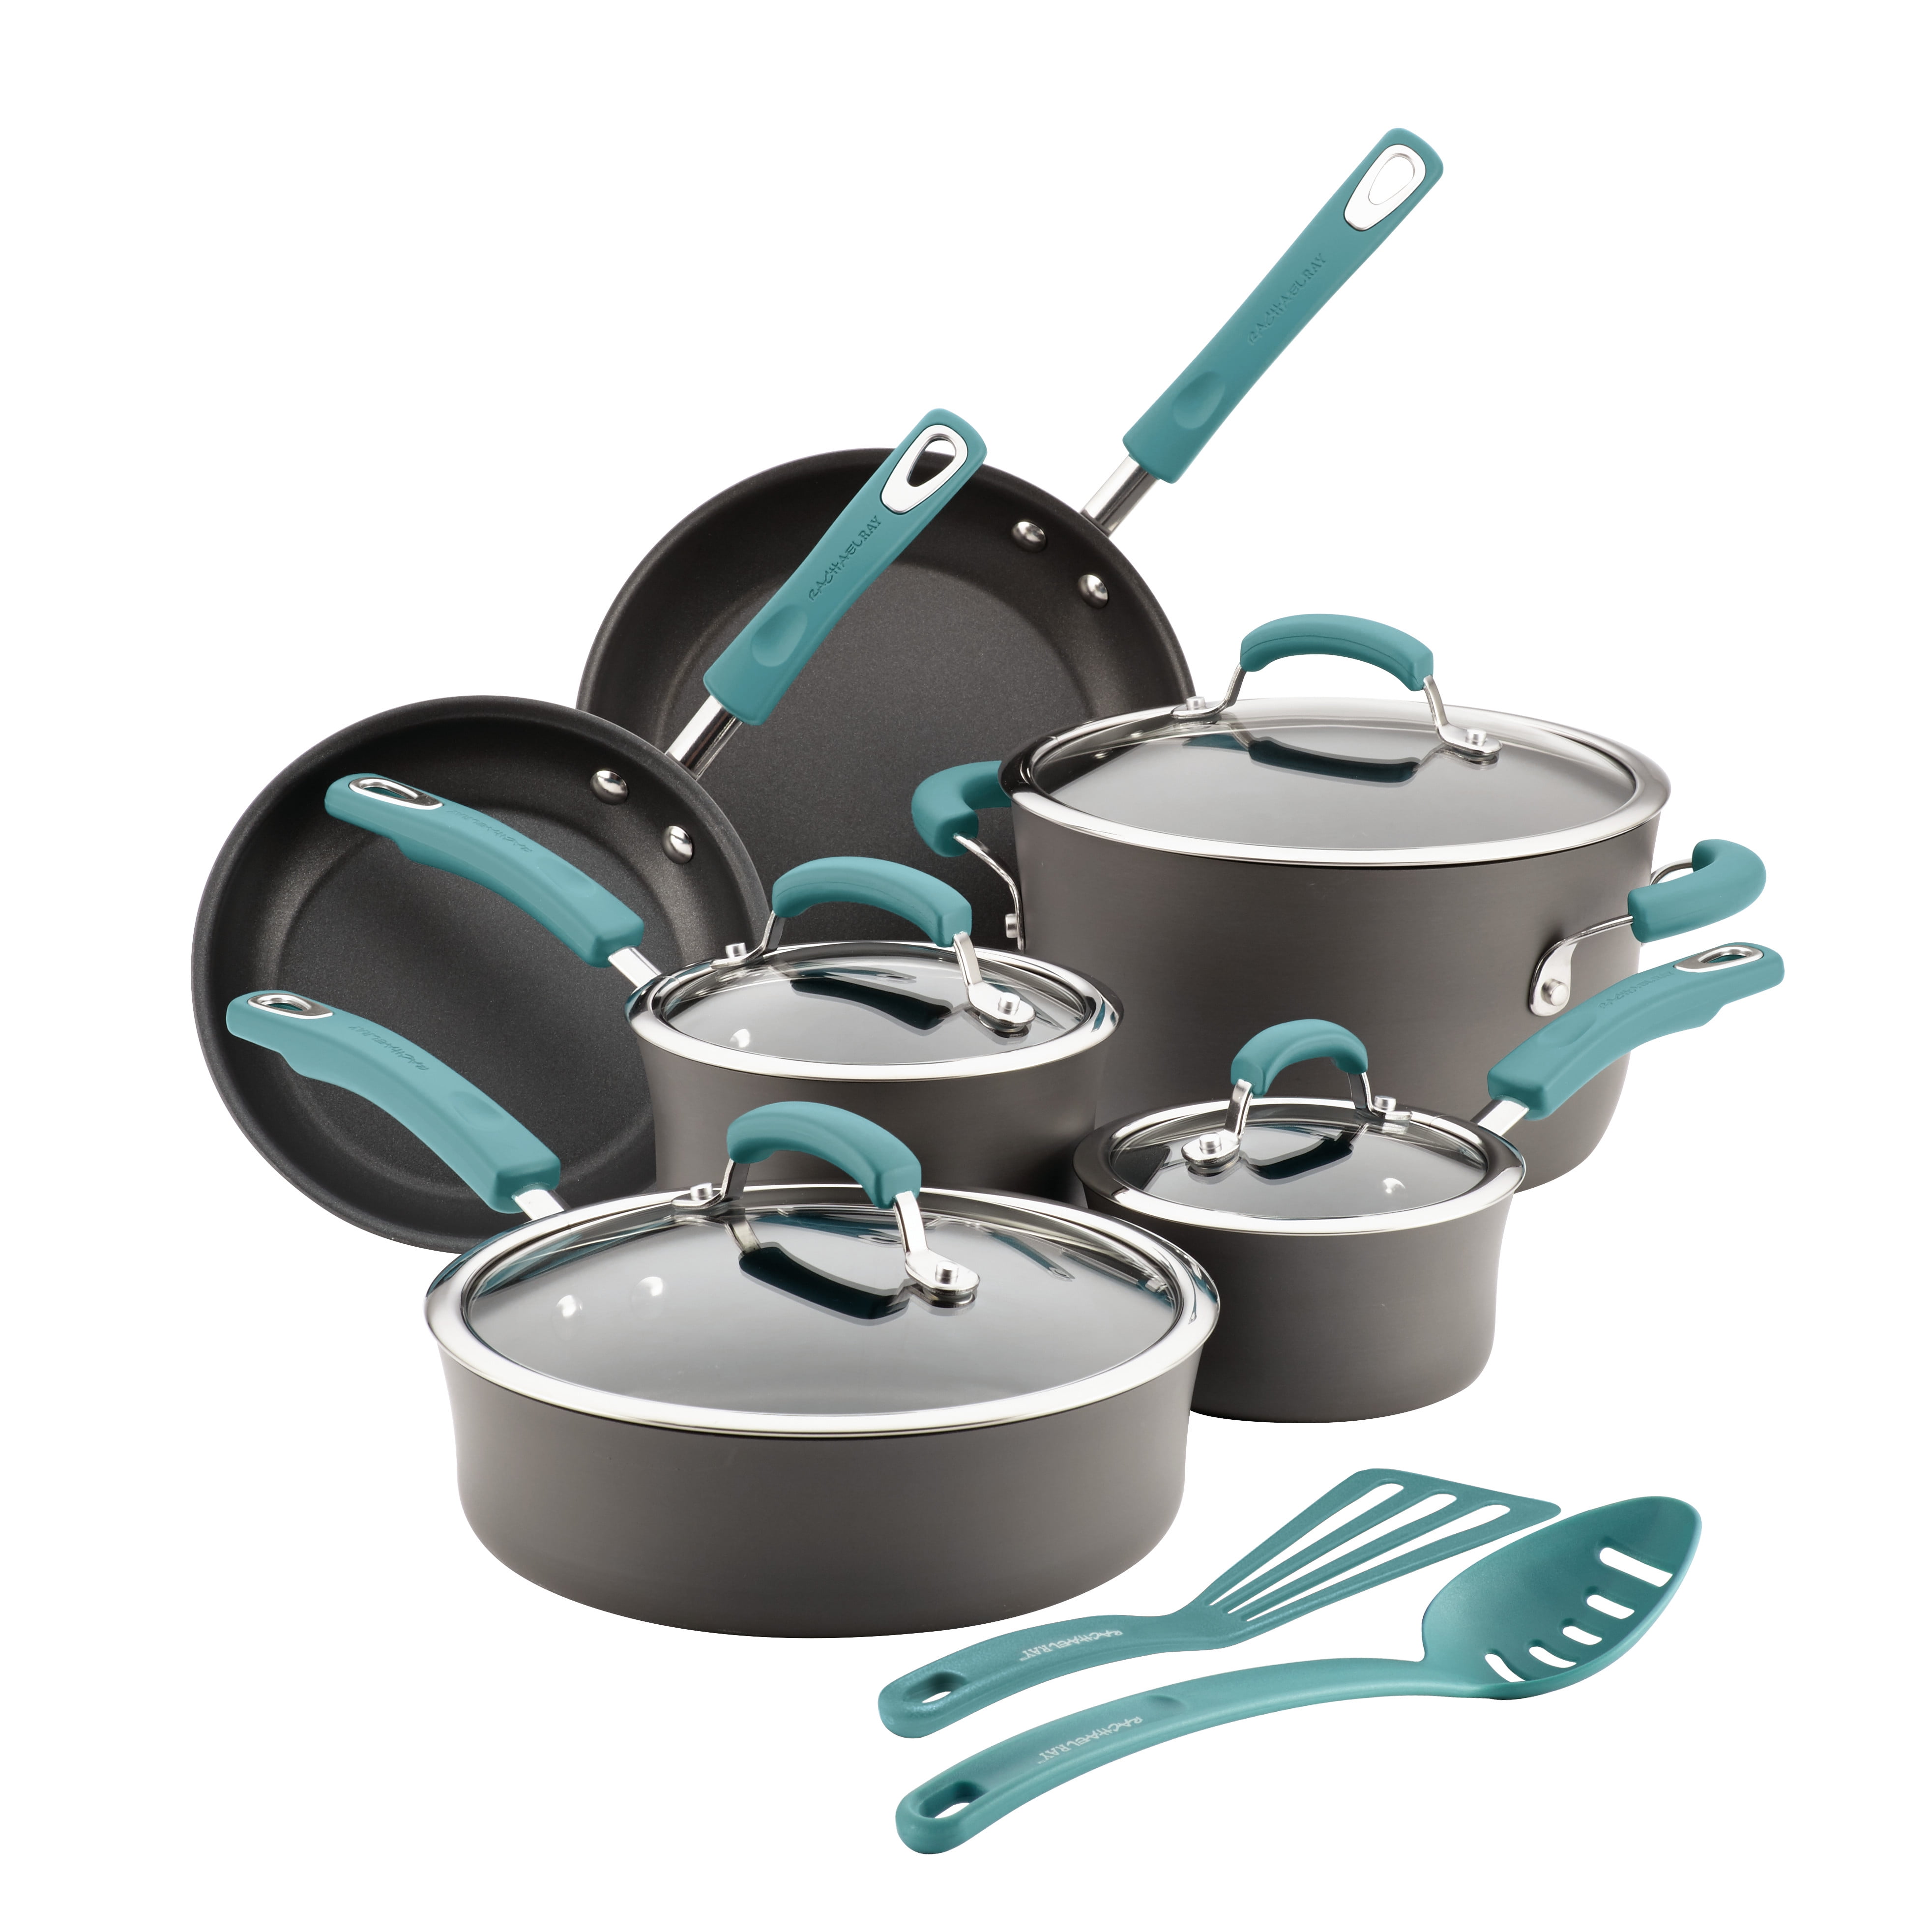 Rachael Ray Hard-anodized Nonstick 12-Piece Cookware Set, Gray with Agave  Blue Handles